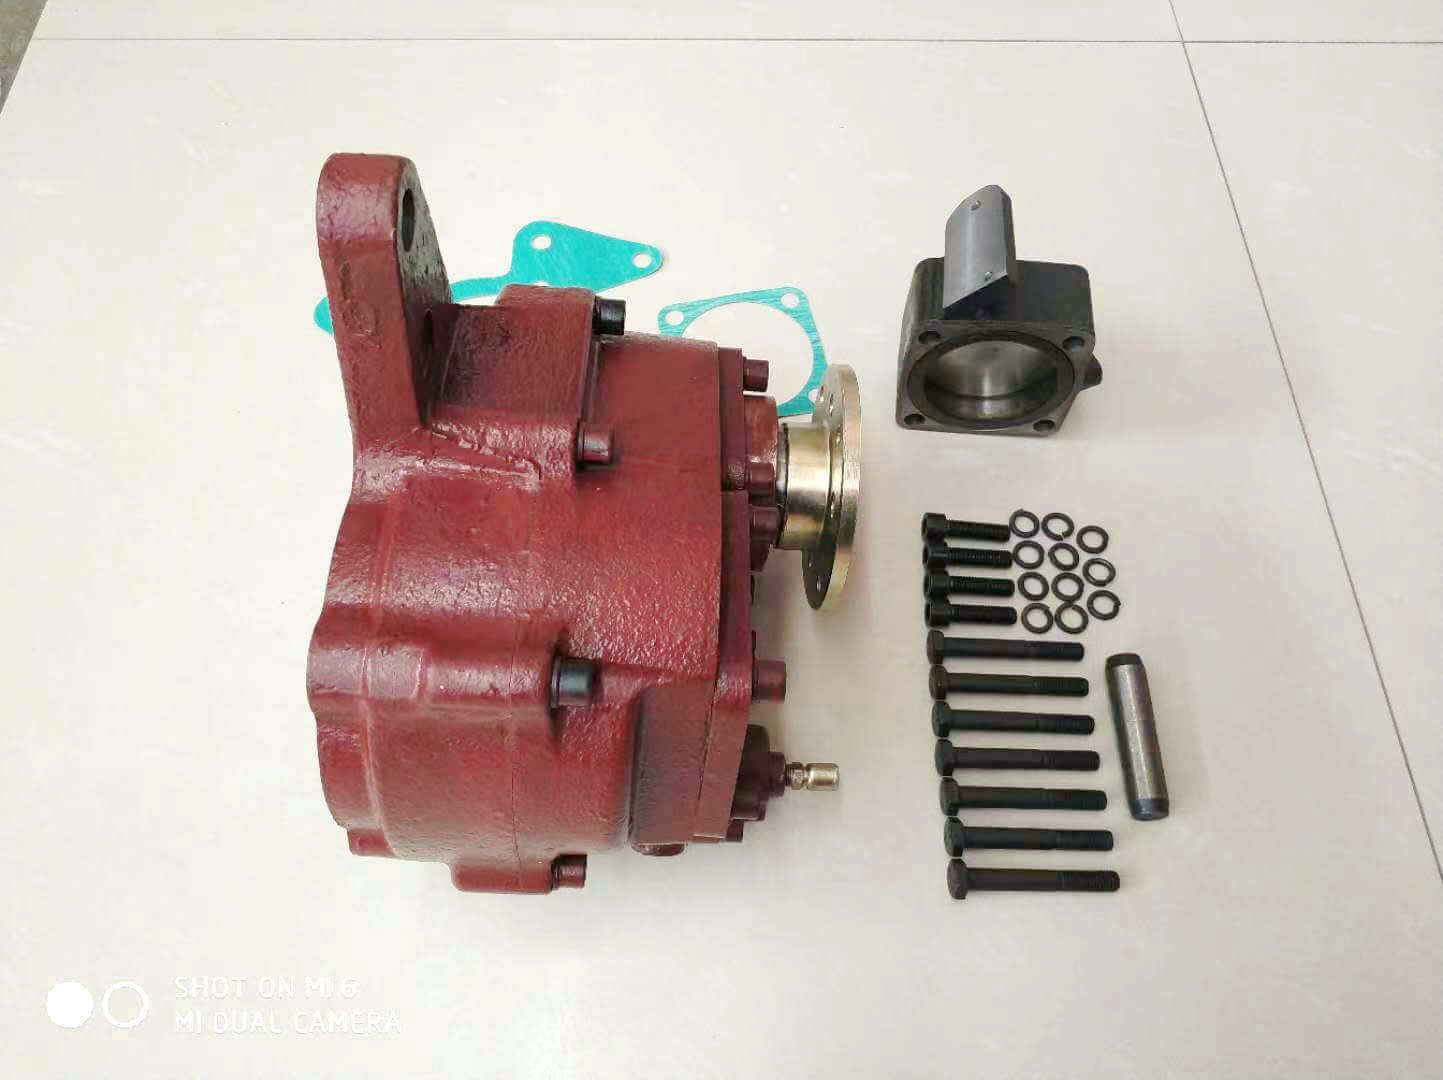  Power Take-off (PTO) For Fast 8JS118, 9JS119 Transmission PTO with ISO Flange 